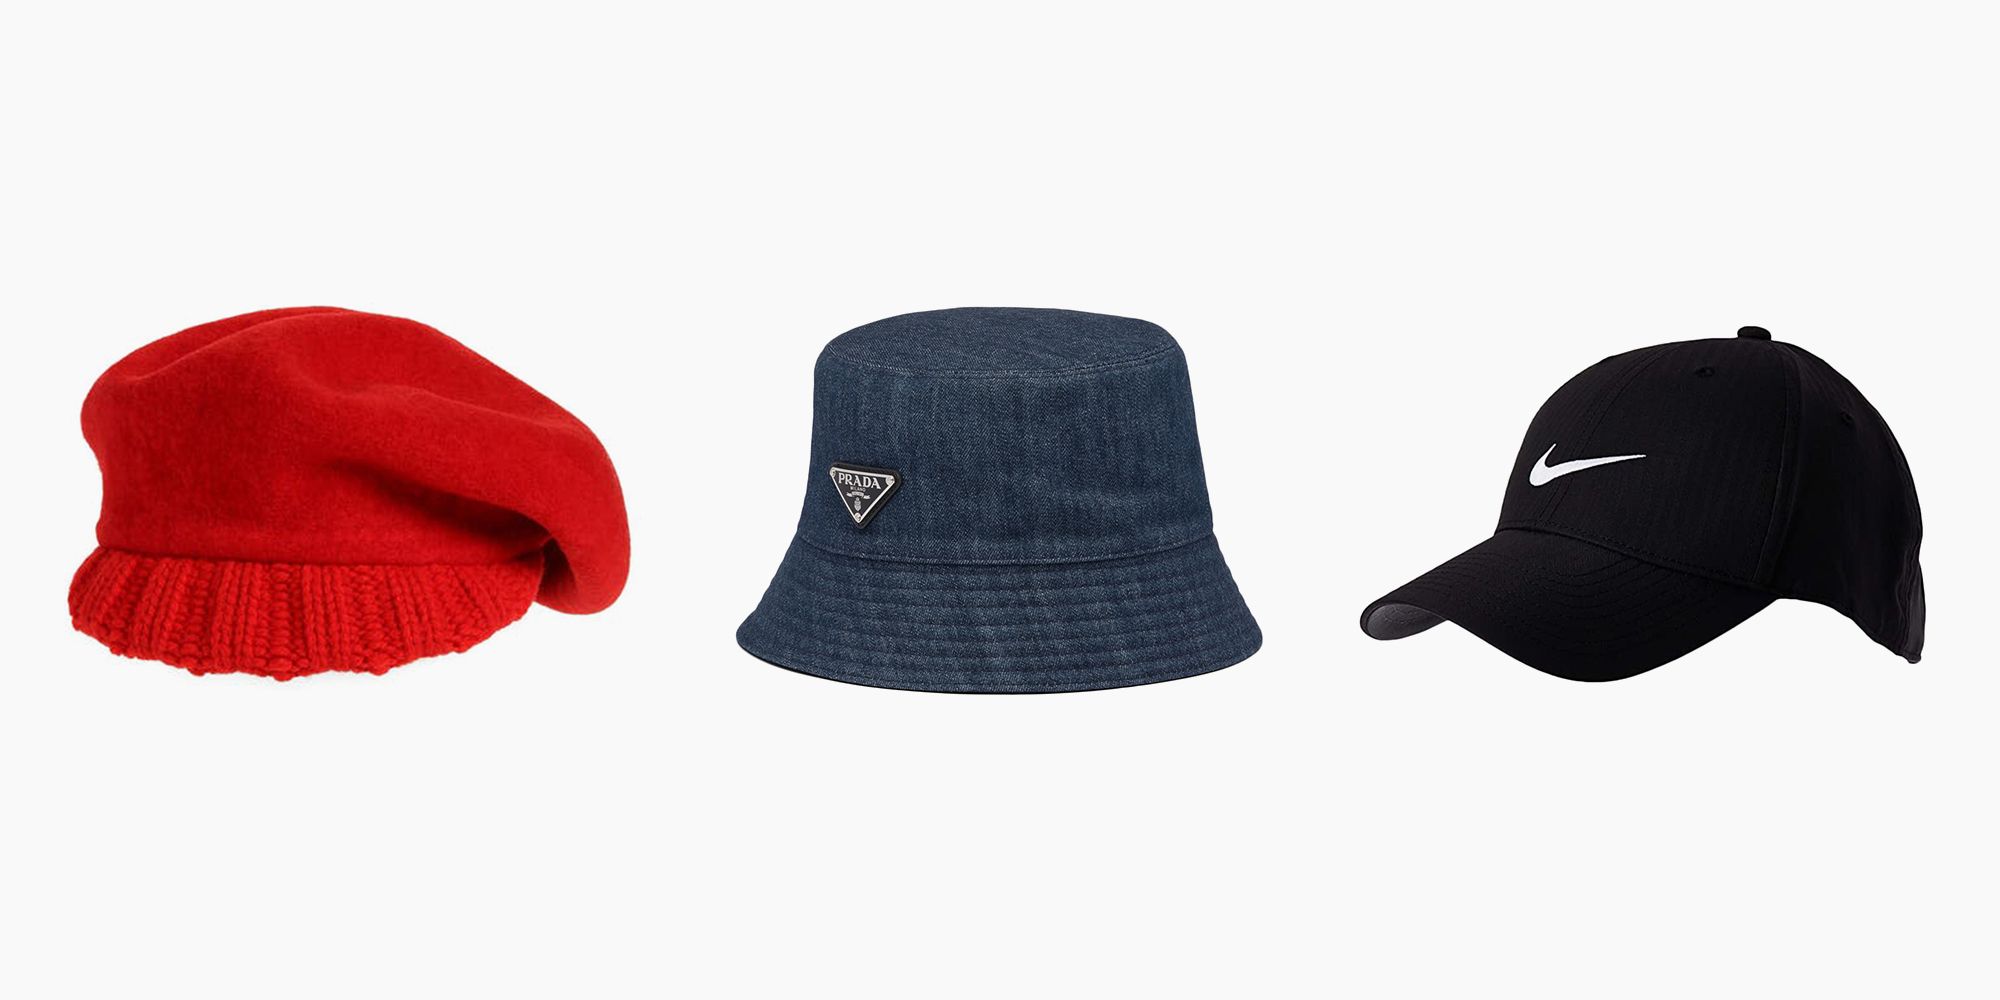 25 Best Fall Hats to Wear With All Your Fall Fits — Best Fall Hats for Women